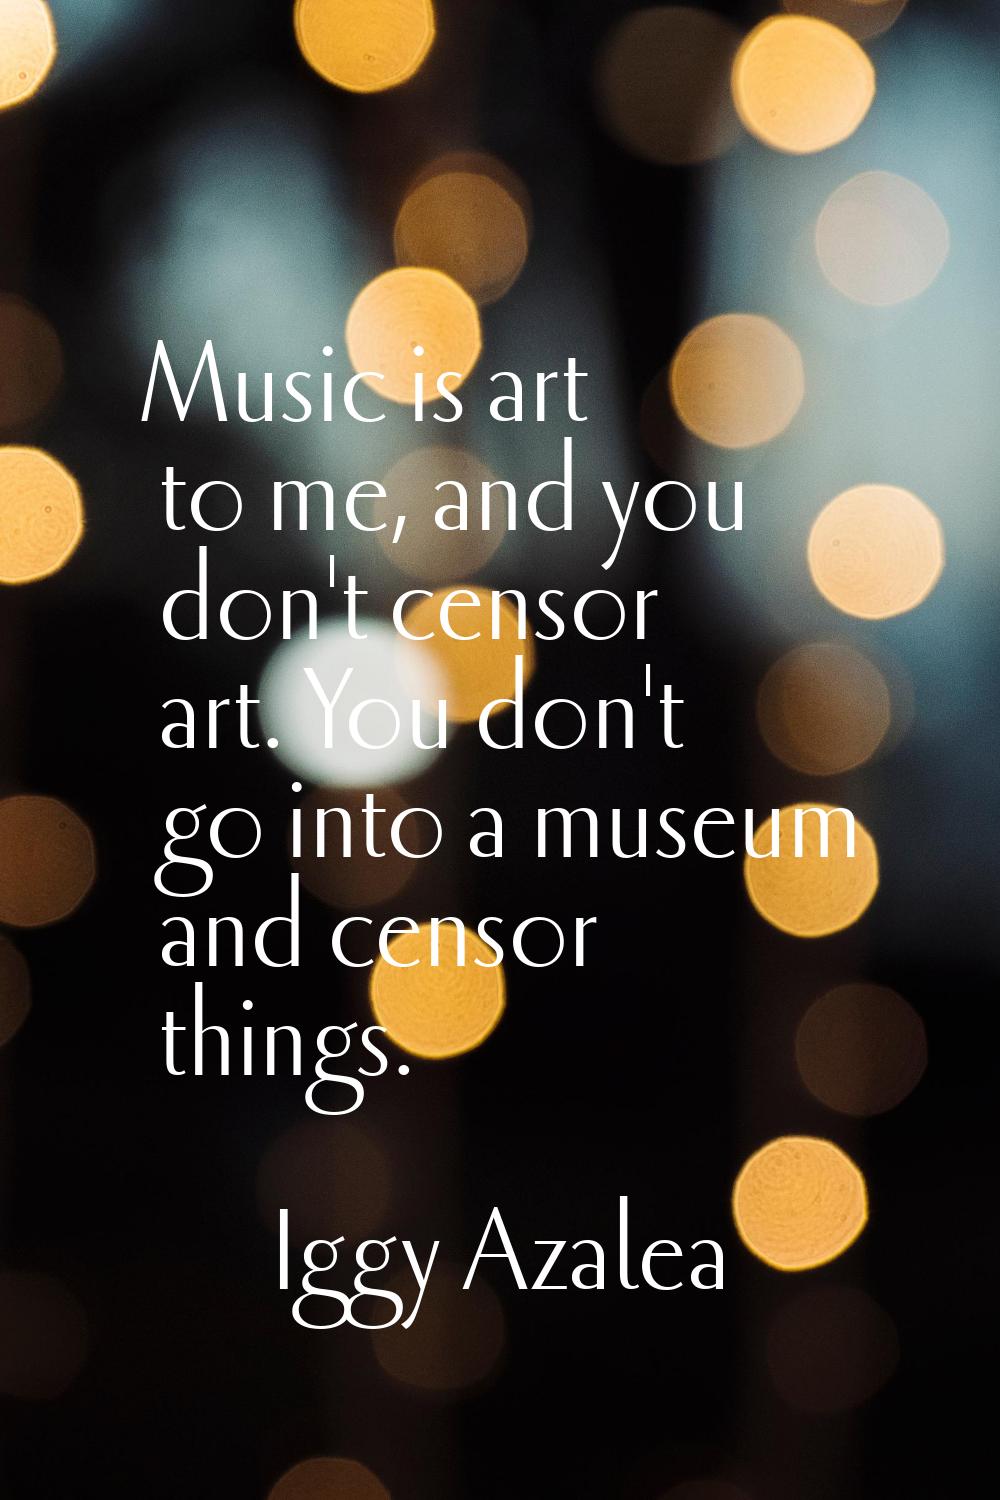 Music is art to me, and you don't censor art. You don't go into a museum and censor things.